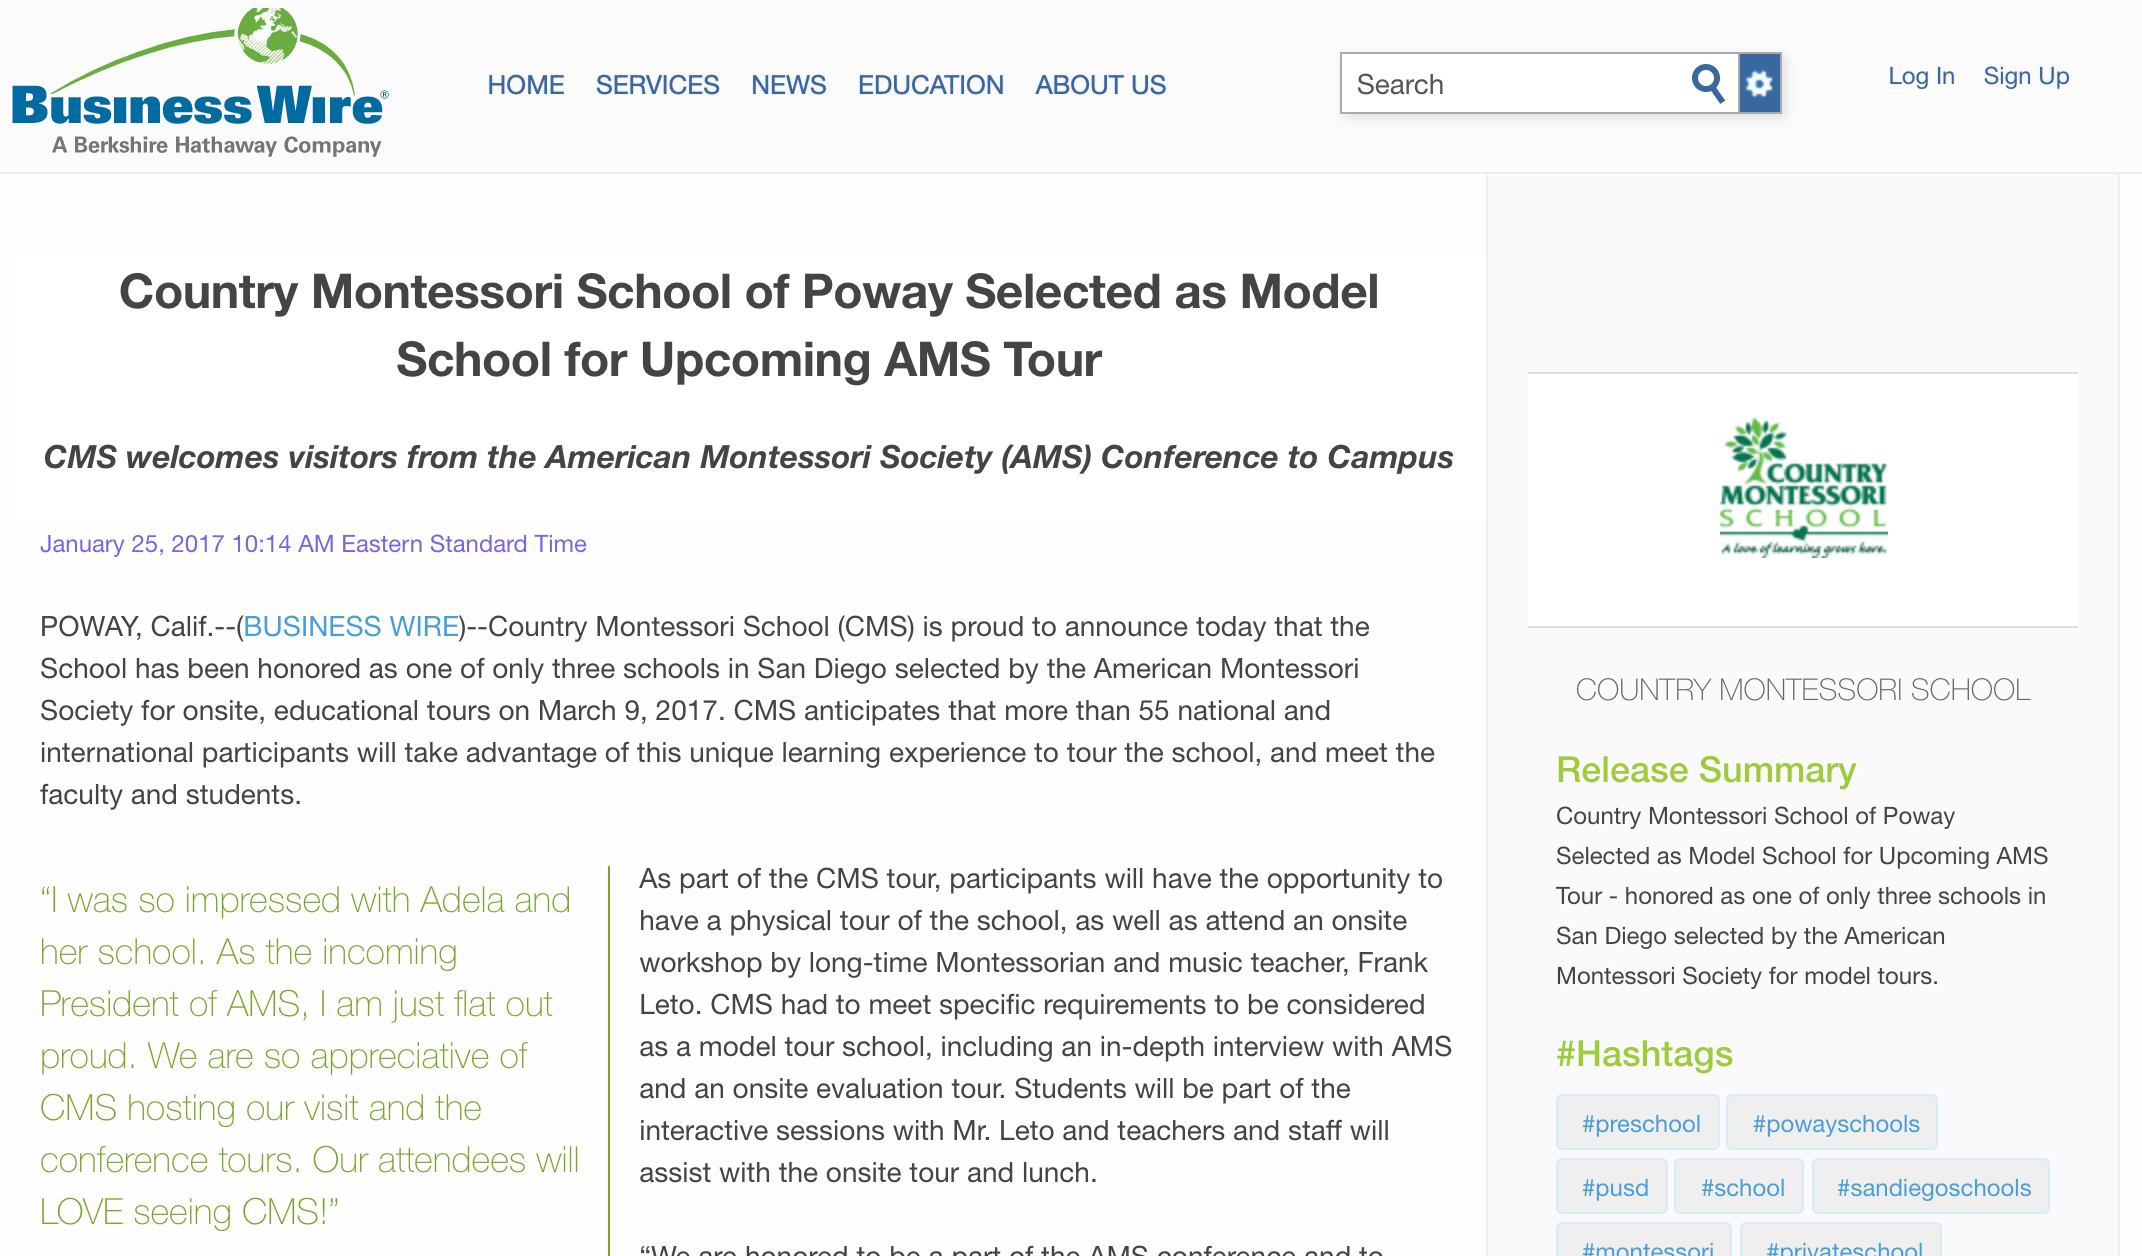 Country Montessori School of Poway Selected as Model School for Upcoming AMS Tour